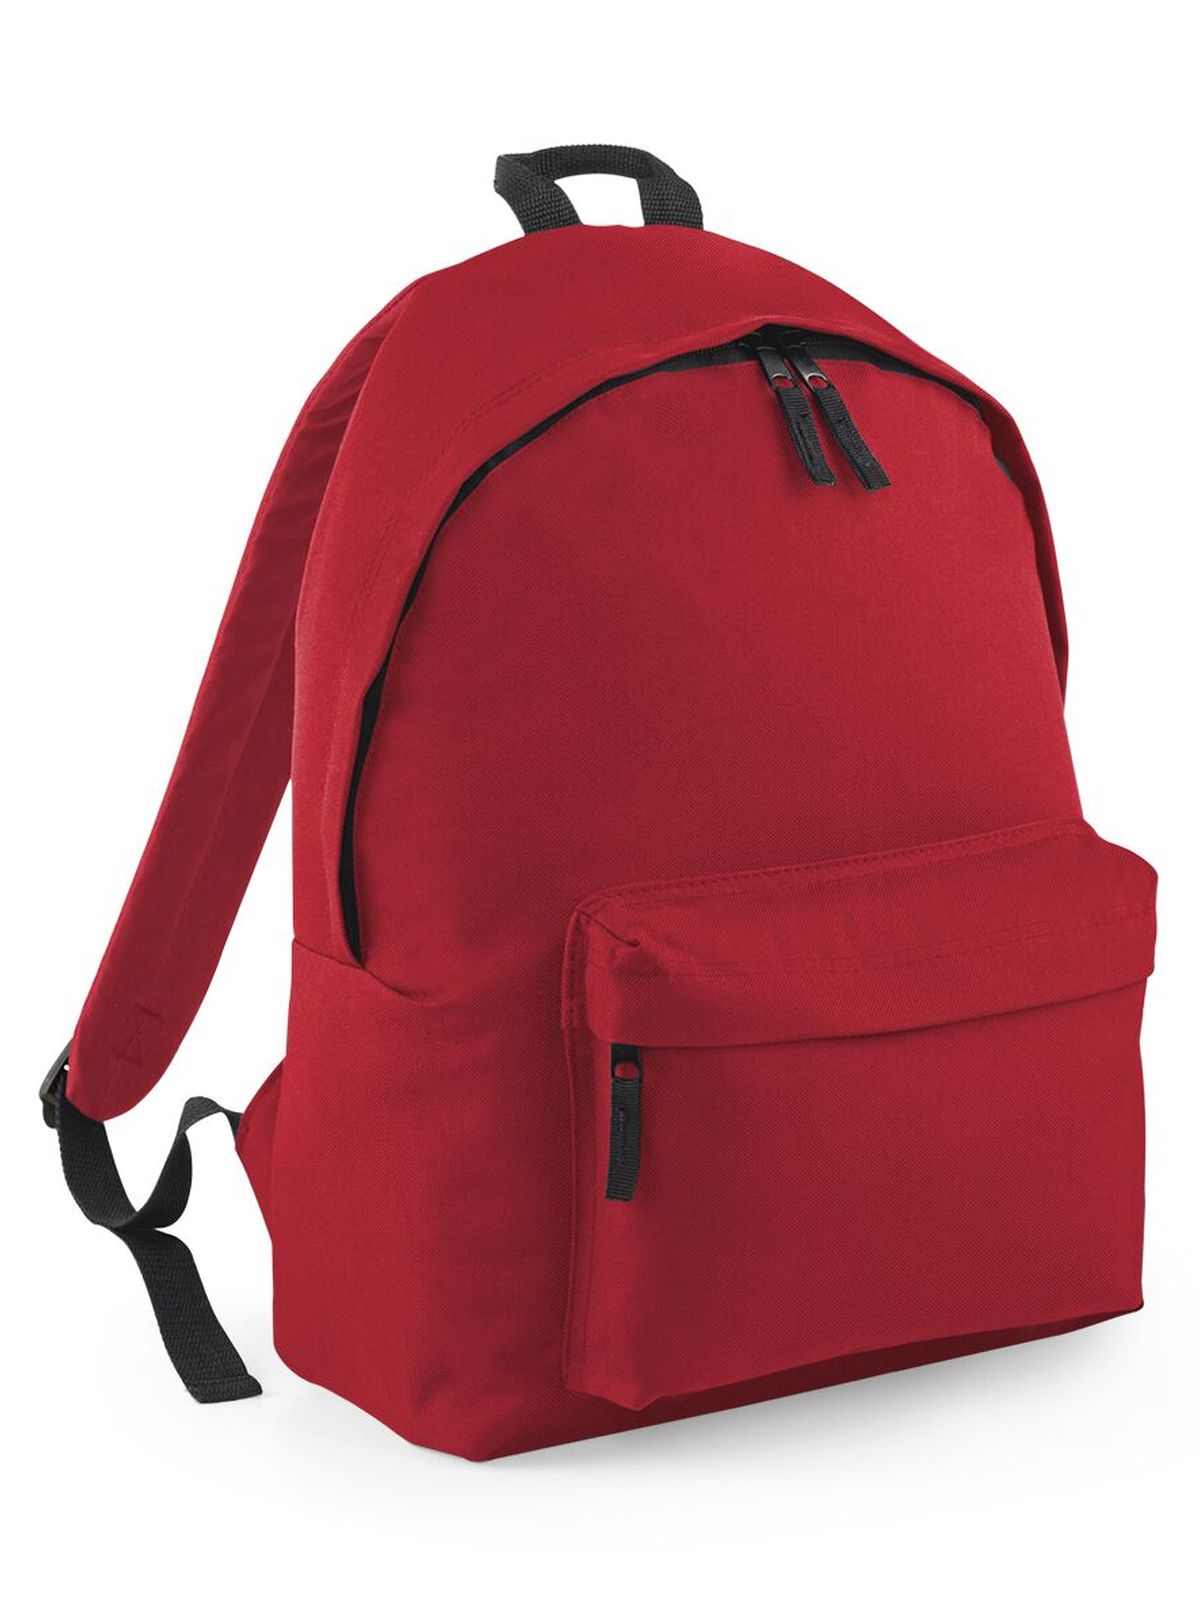 original-fashion-backpack-classic-red.webp